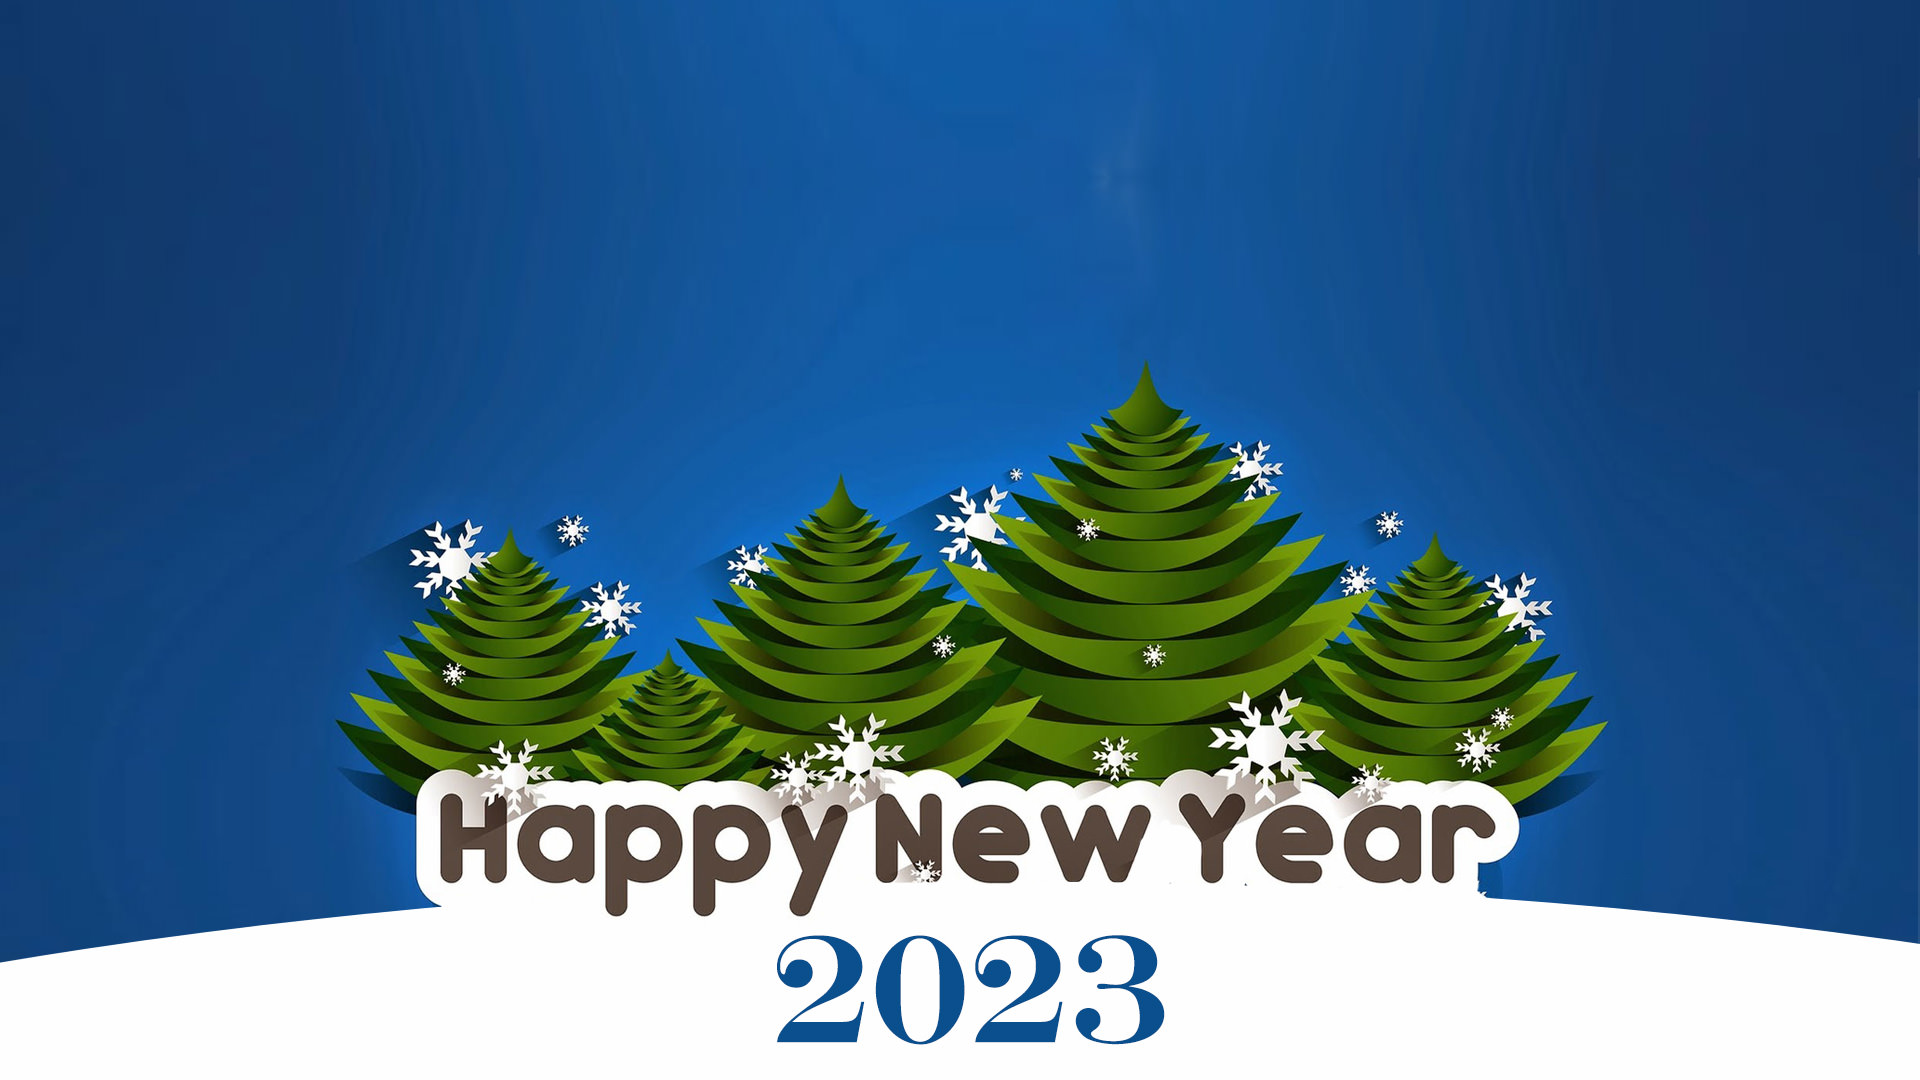 Awesome Happy New Year 2023 Wallpaper